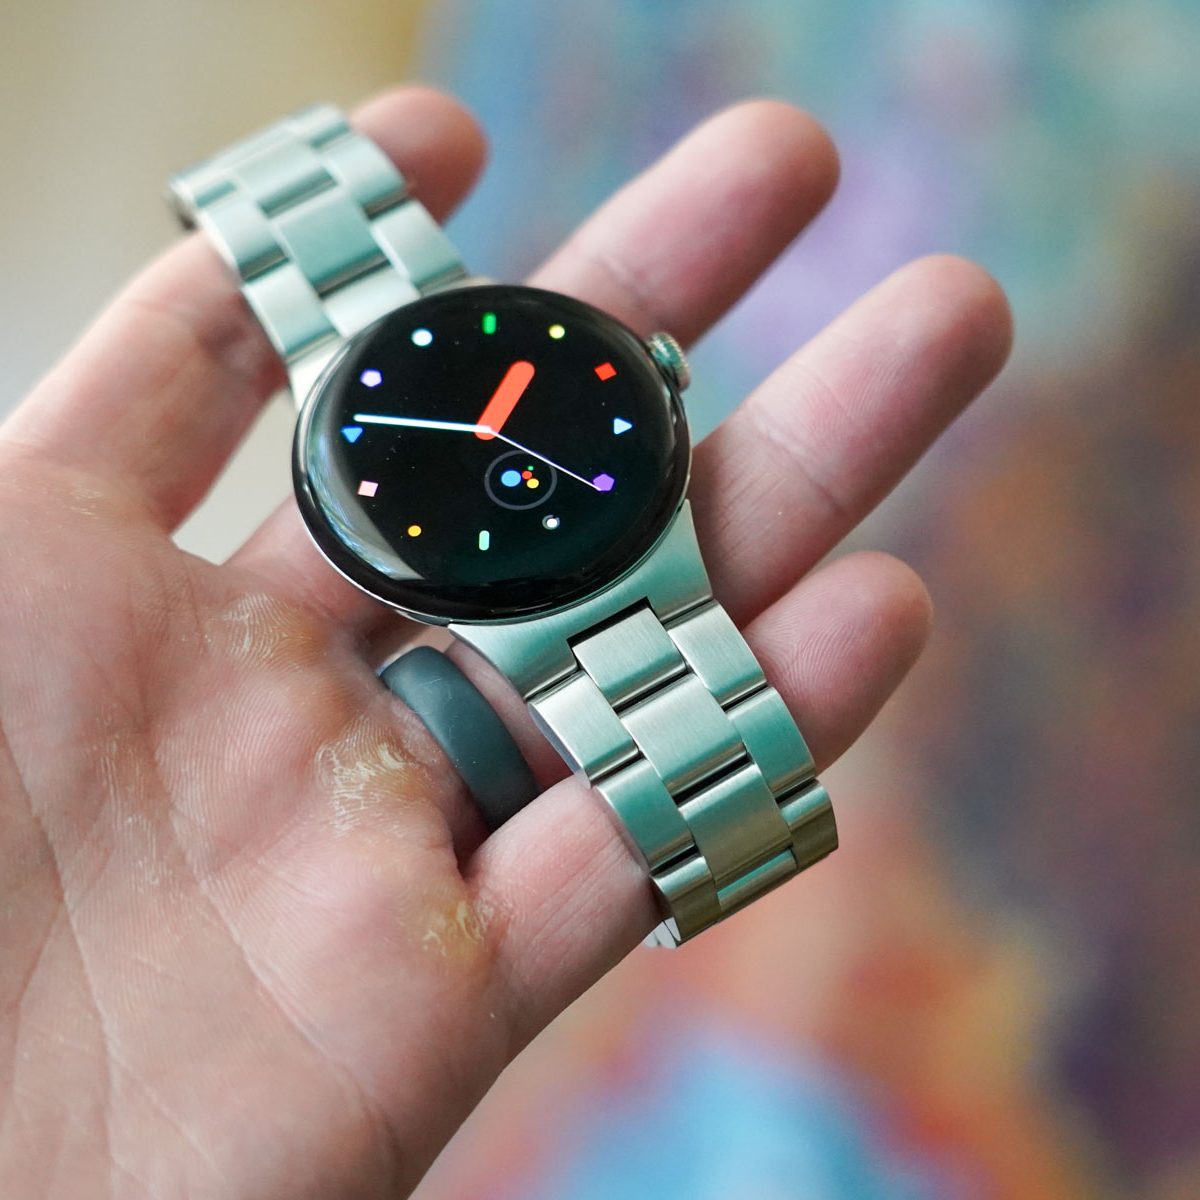 Pixel Watch 2 Gets 4 Exclusive Watch Faces - Here's What They Look